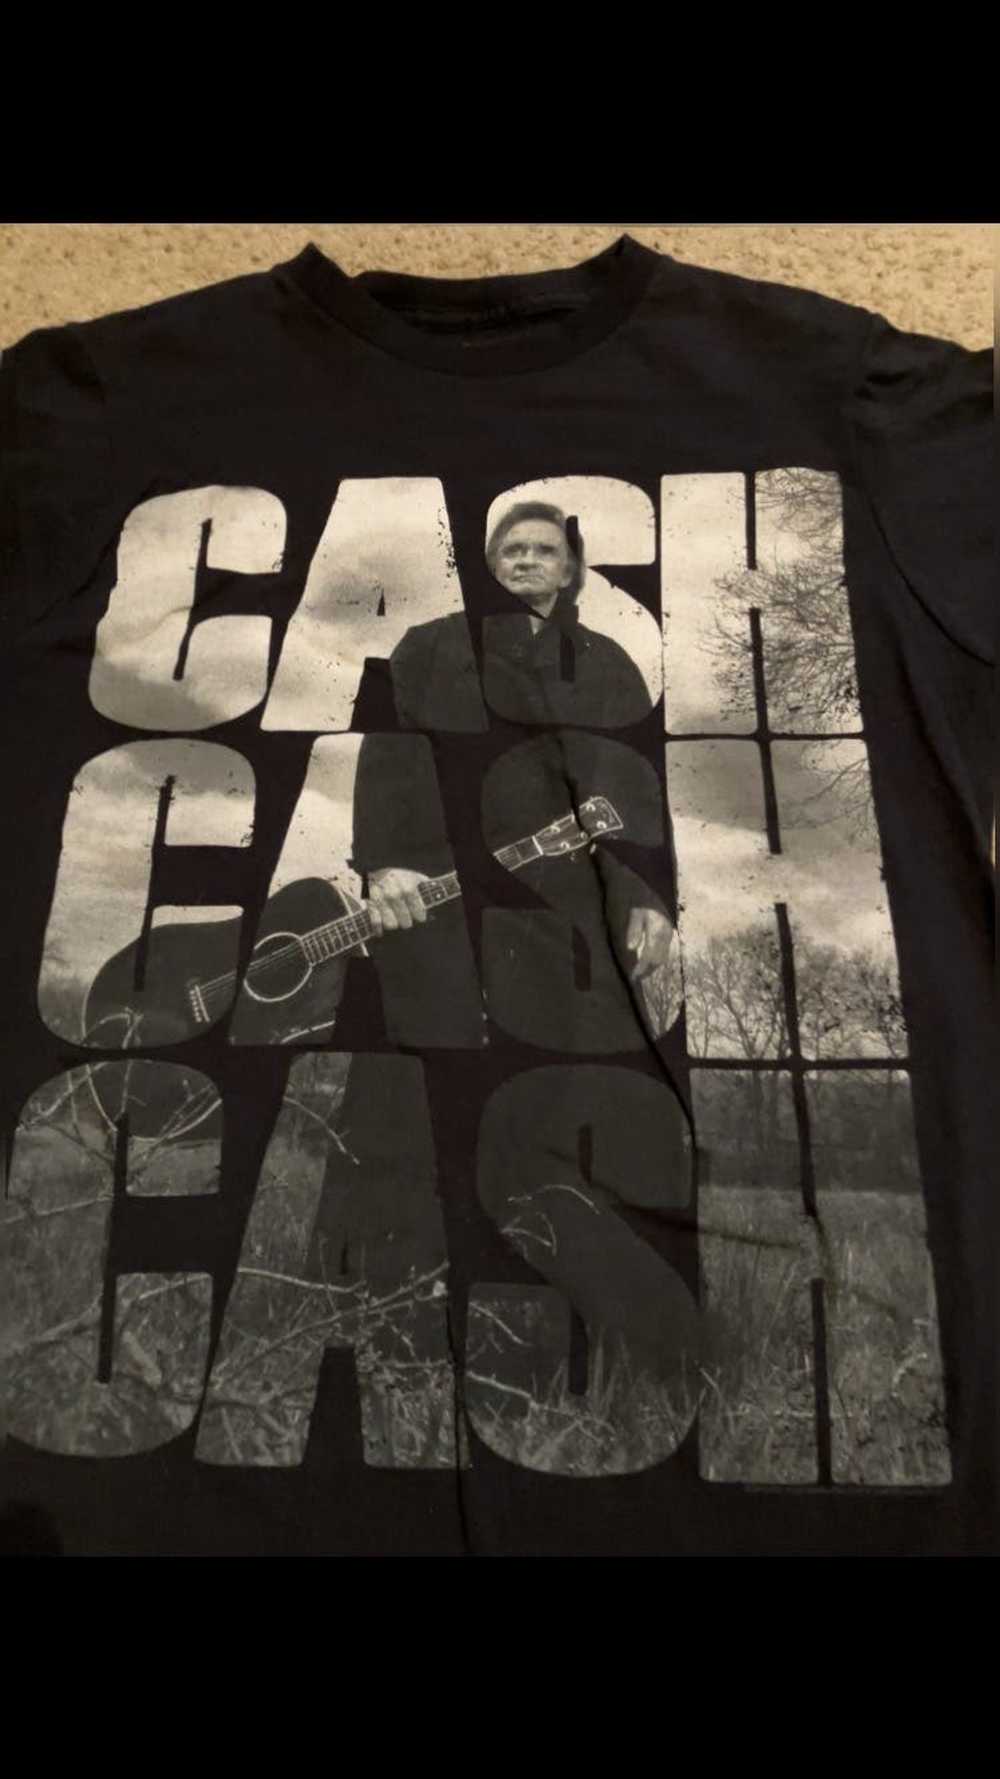 Zion Rootswear johnny cash cash shirt small - image 2